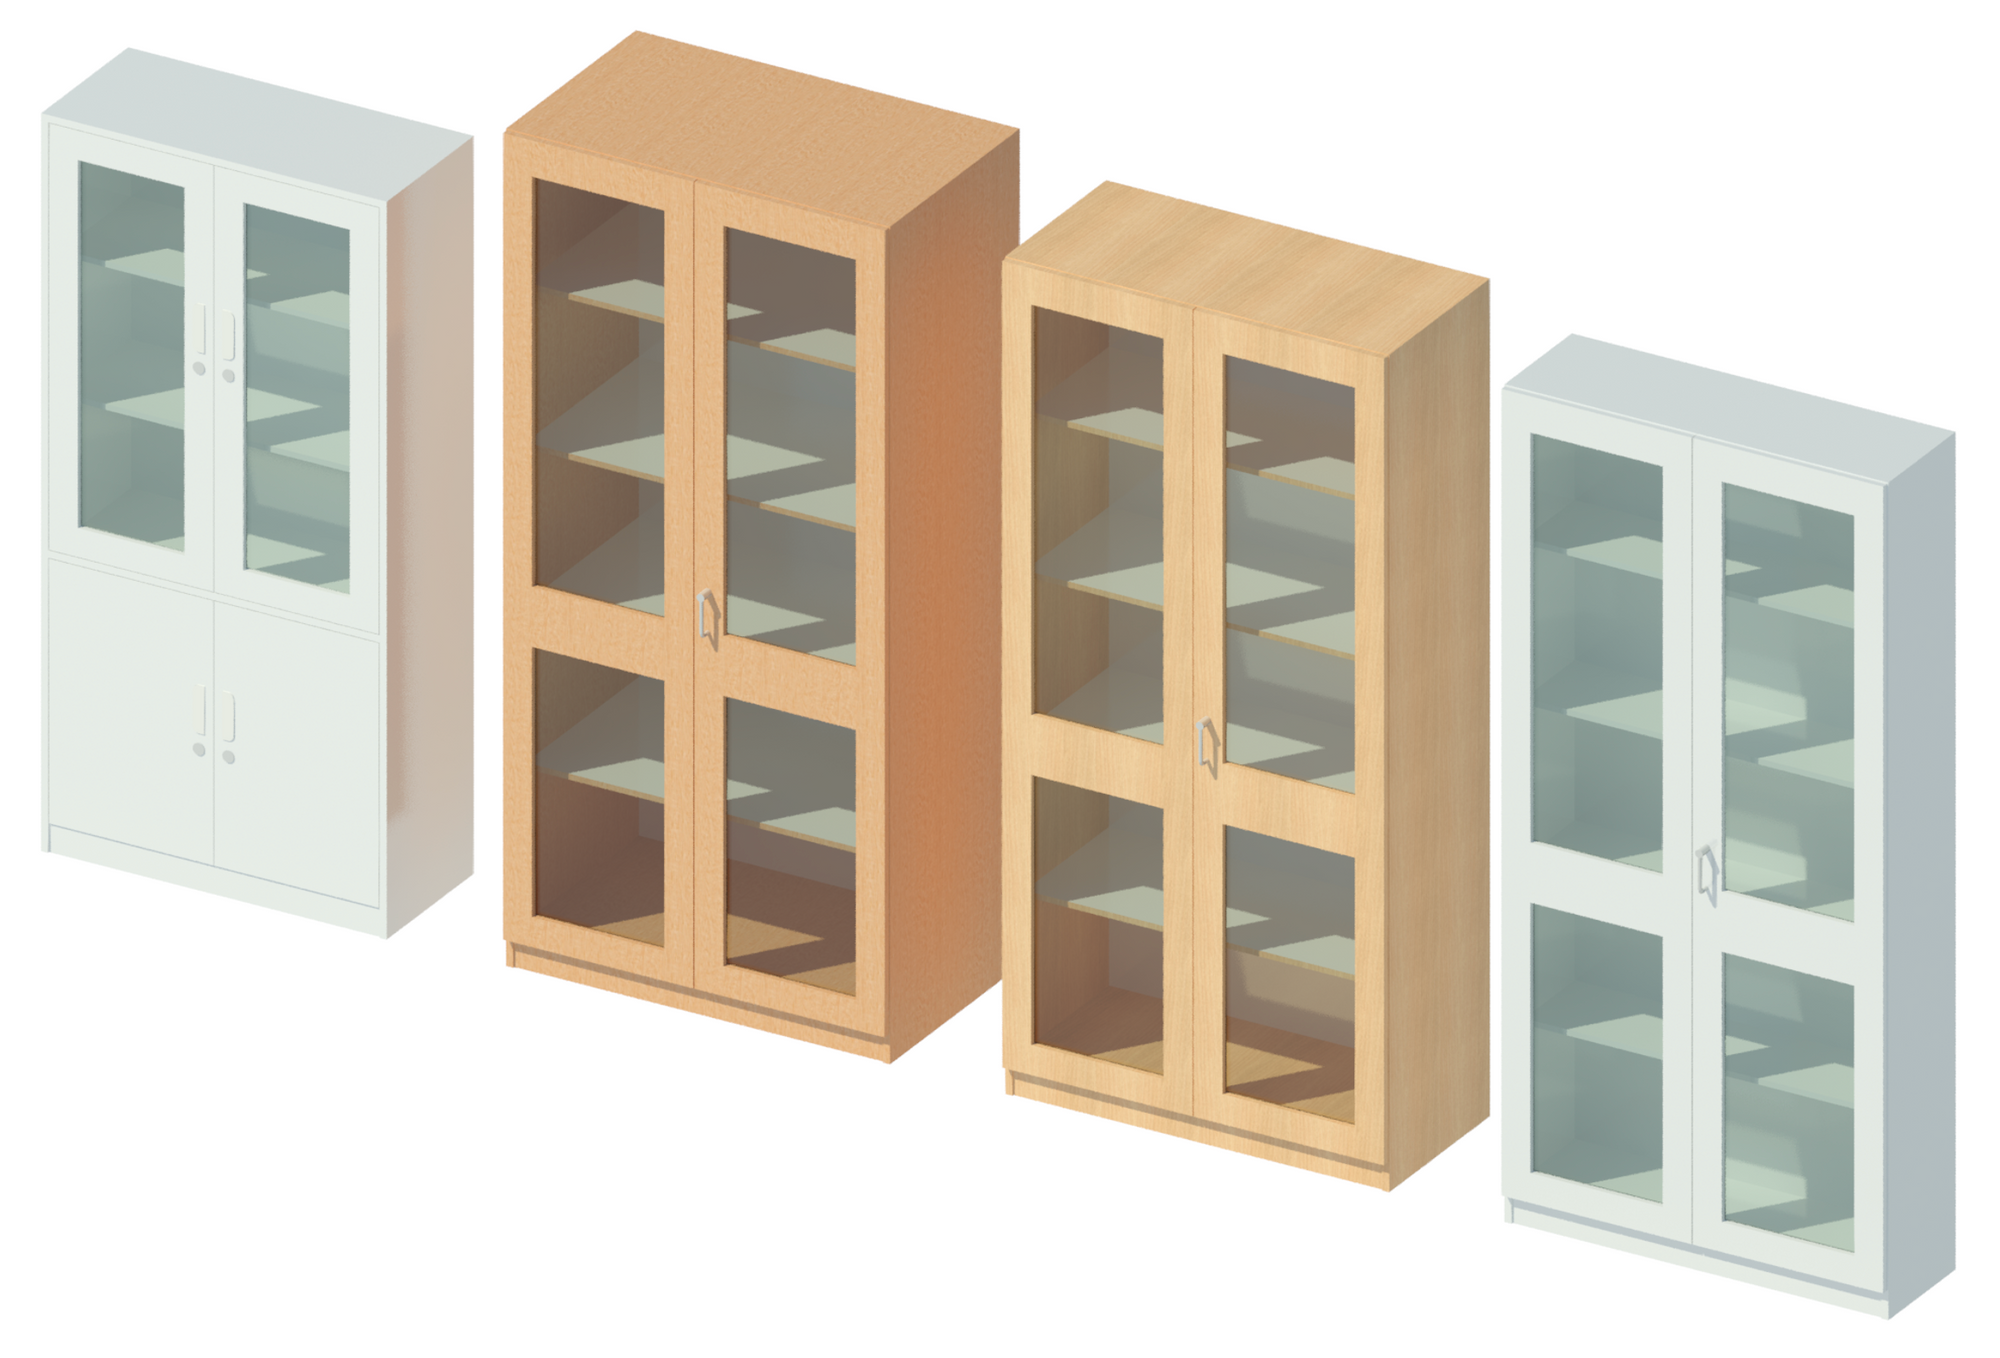 3D rendering showing storage cabinets.